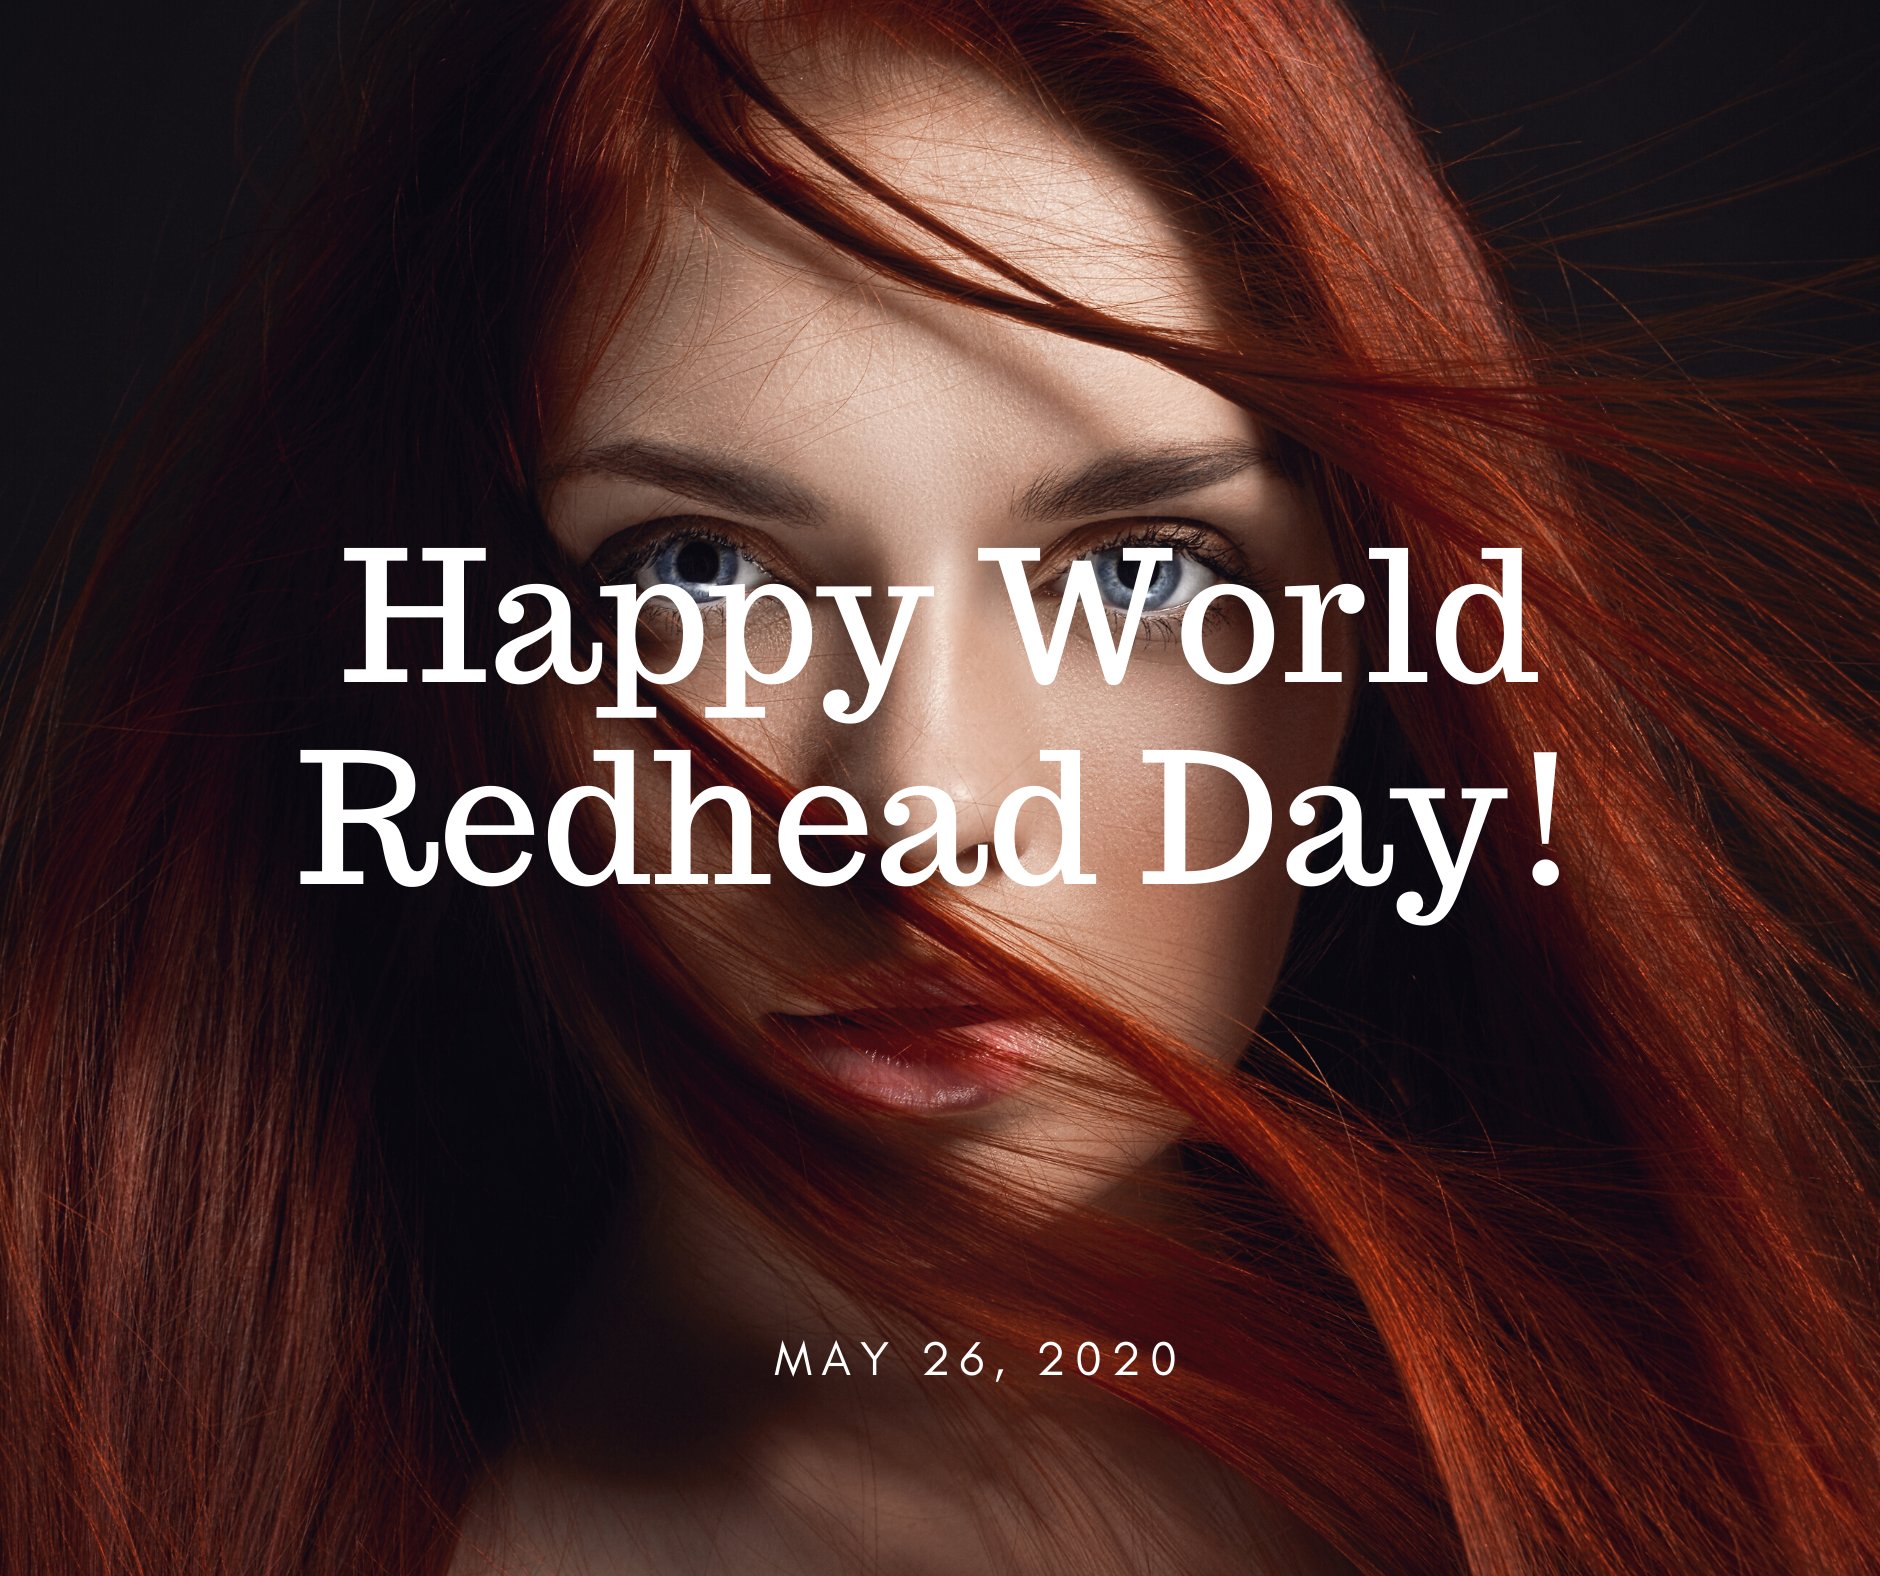 Happy world redhead day 297643What day is world redhead day